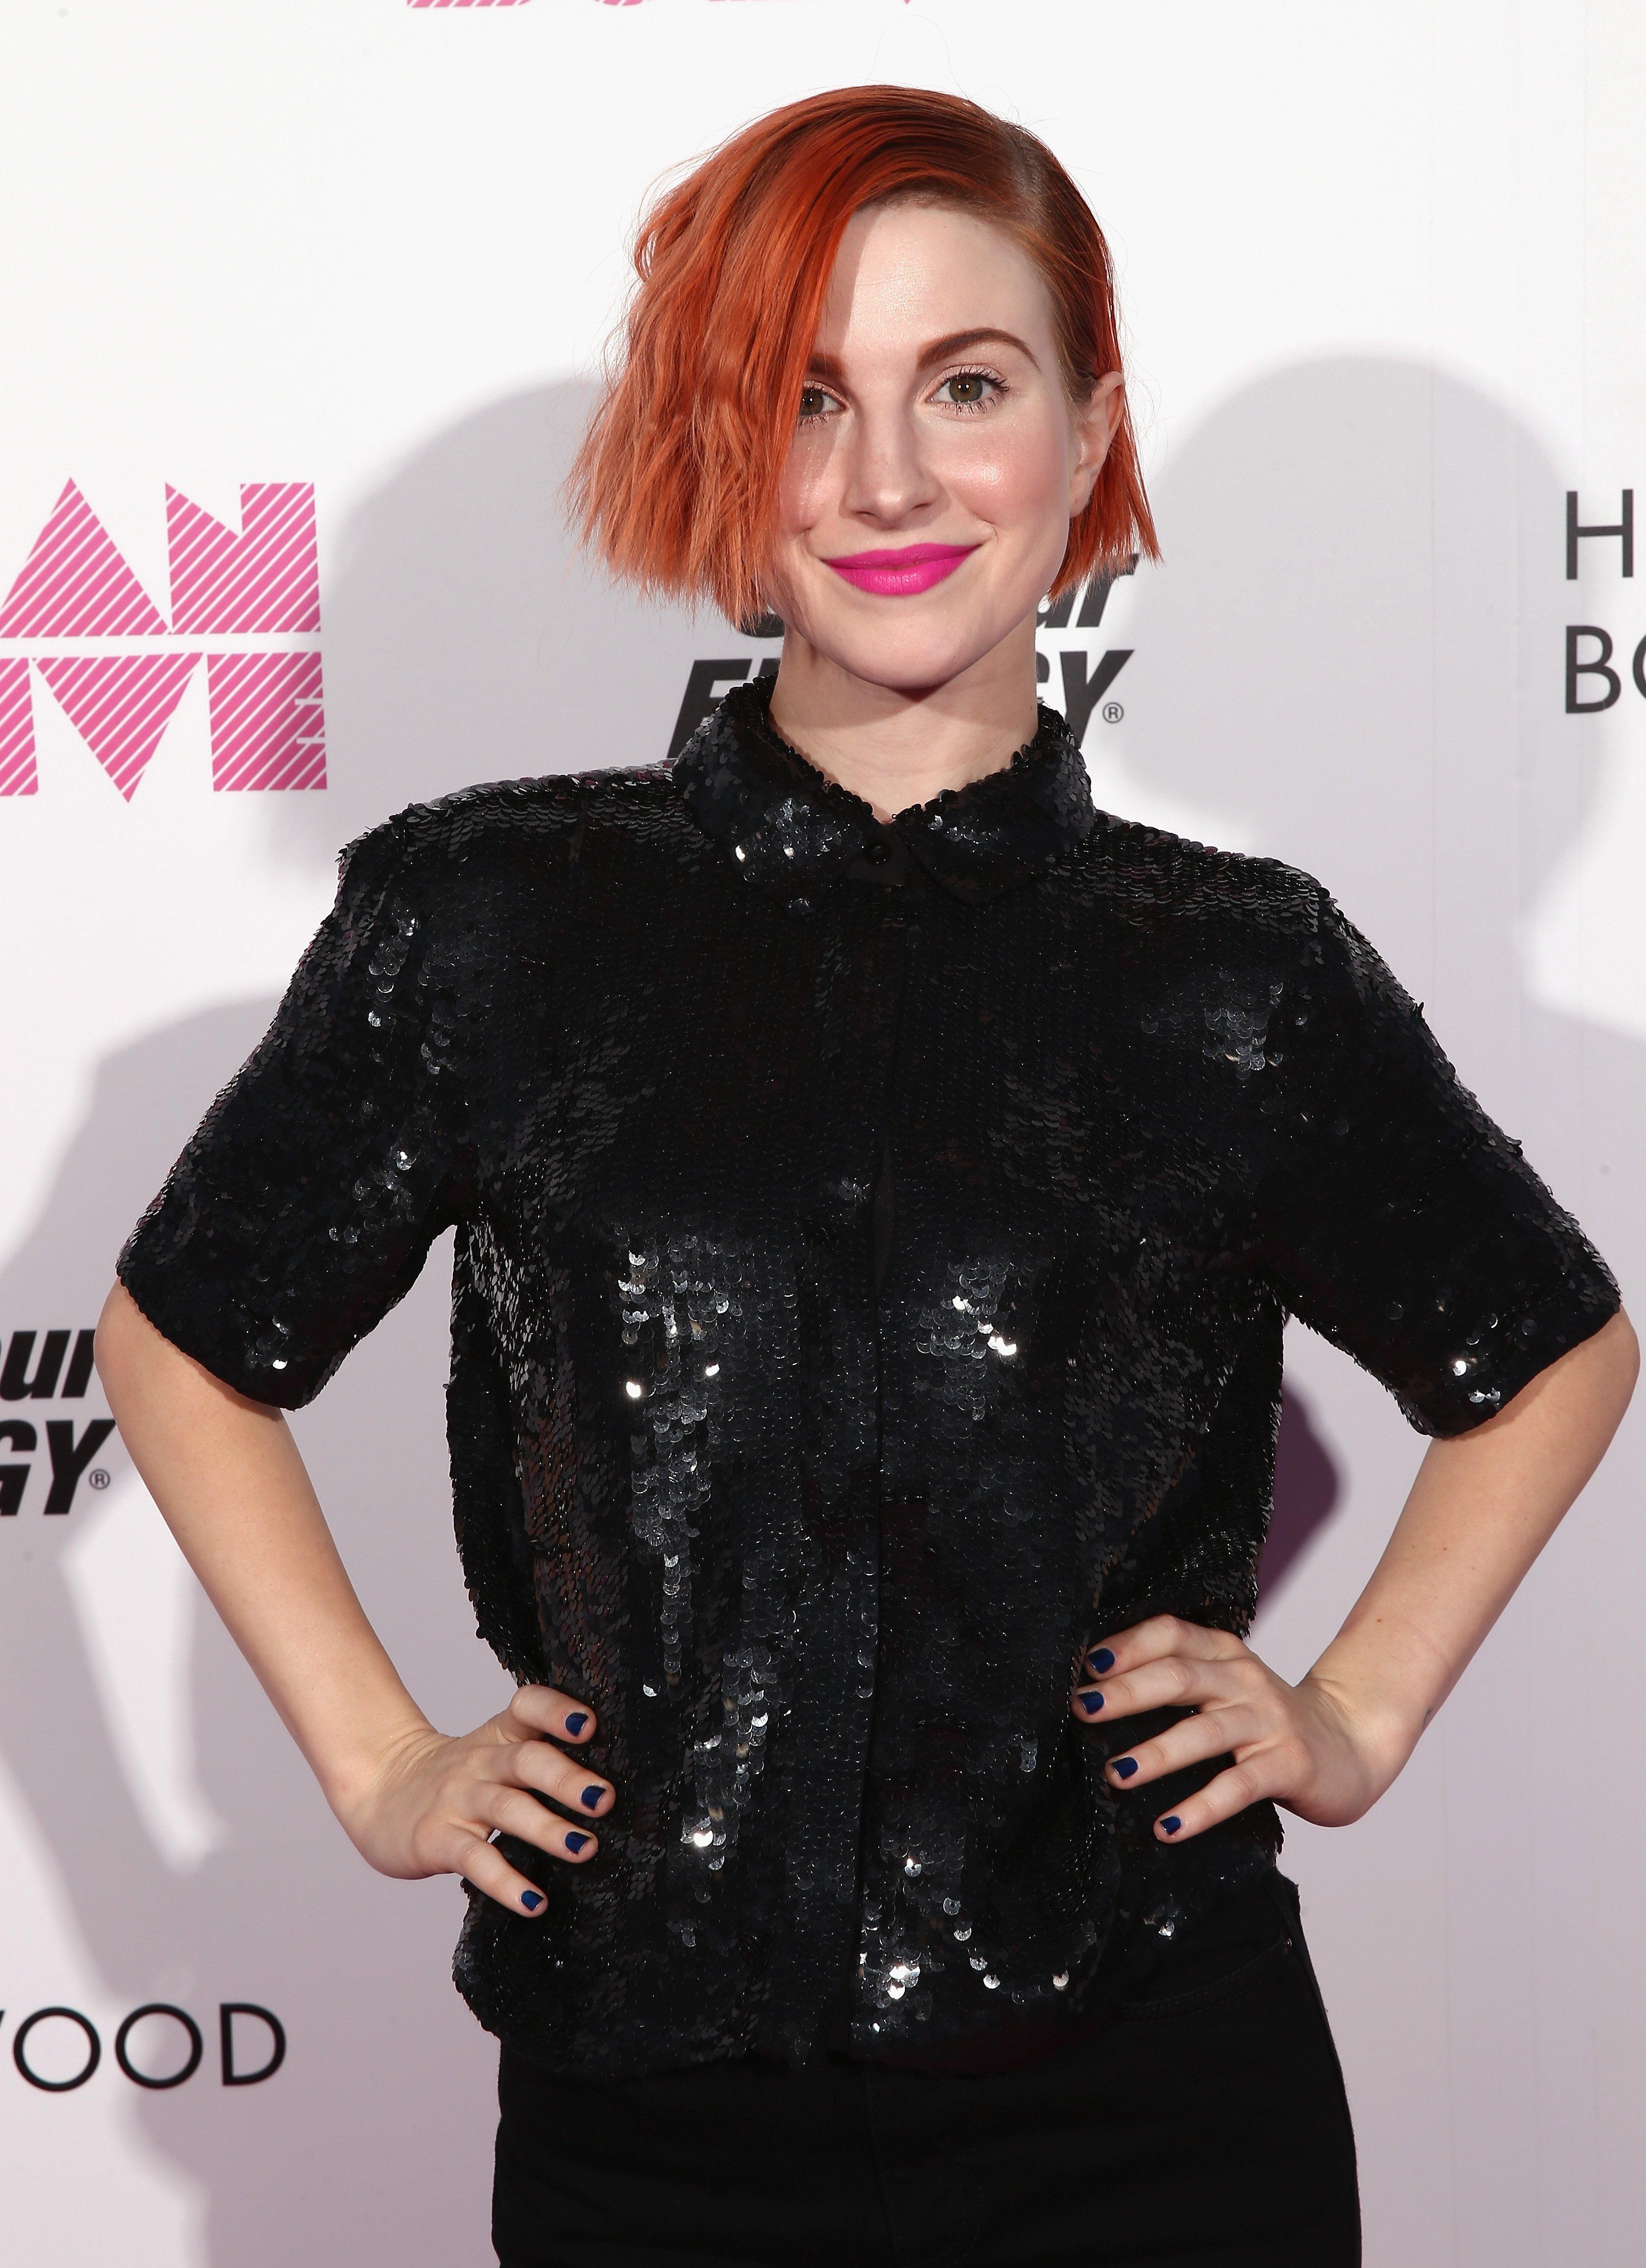 Hayley Williams Launches Her Own Line Of Temporary Hair Dye GRAMMY pic